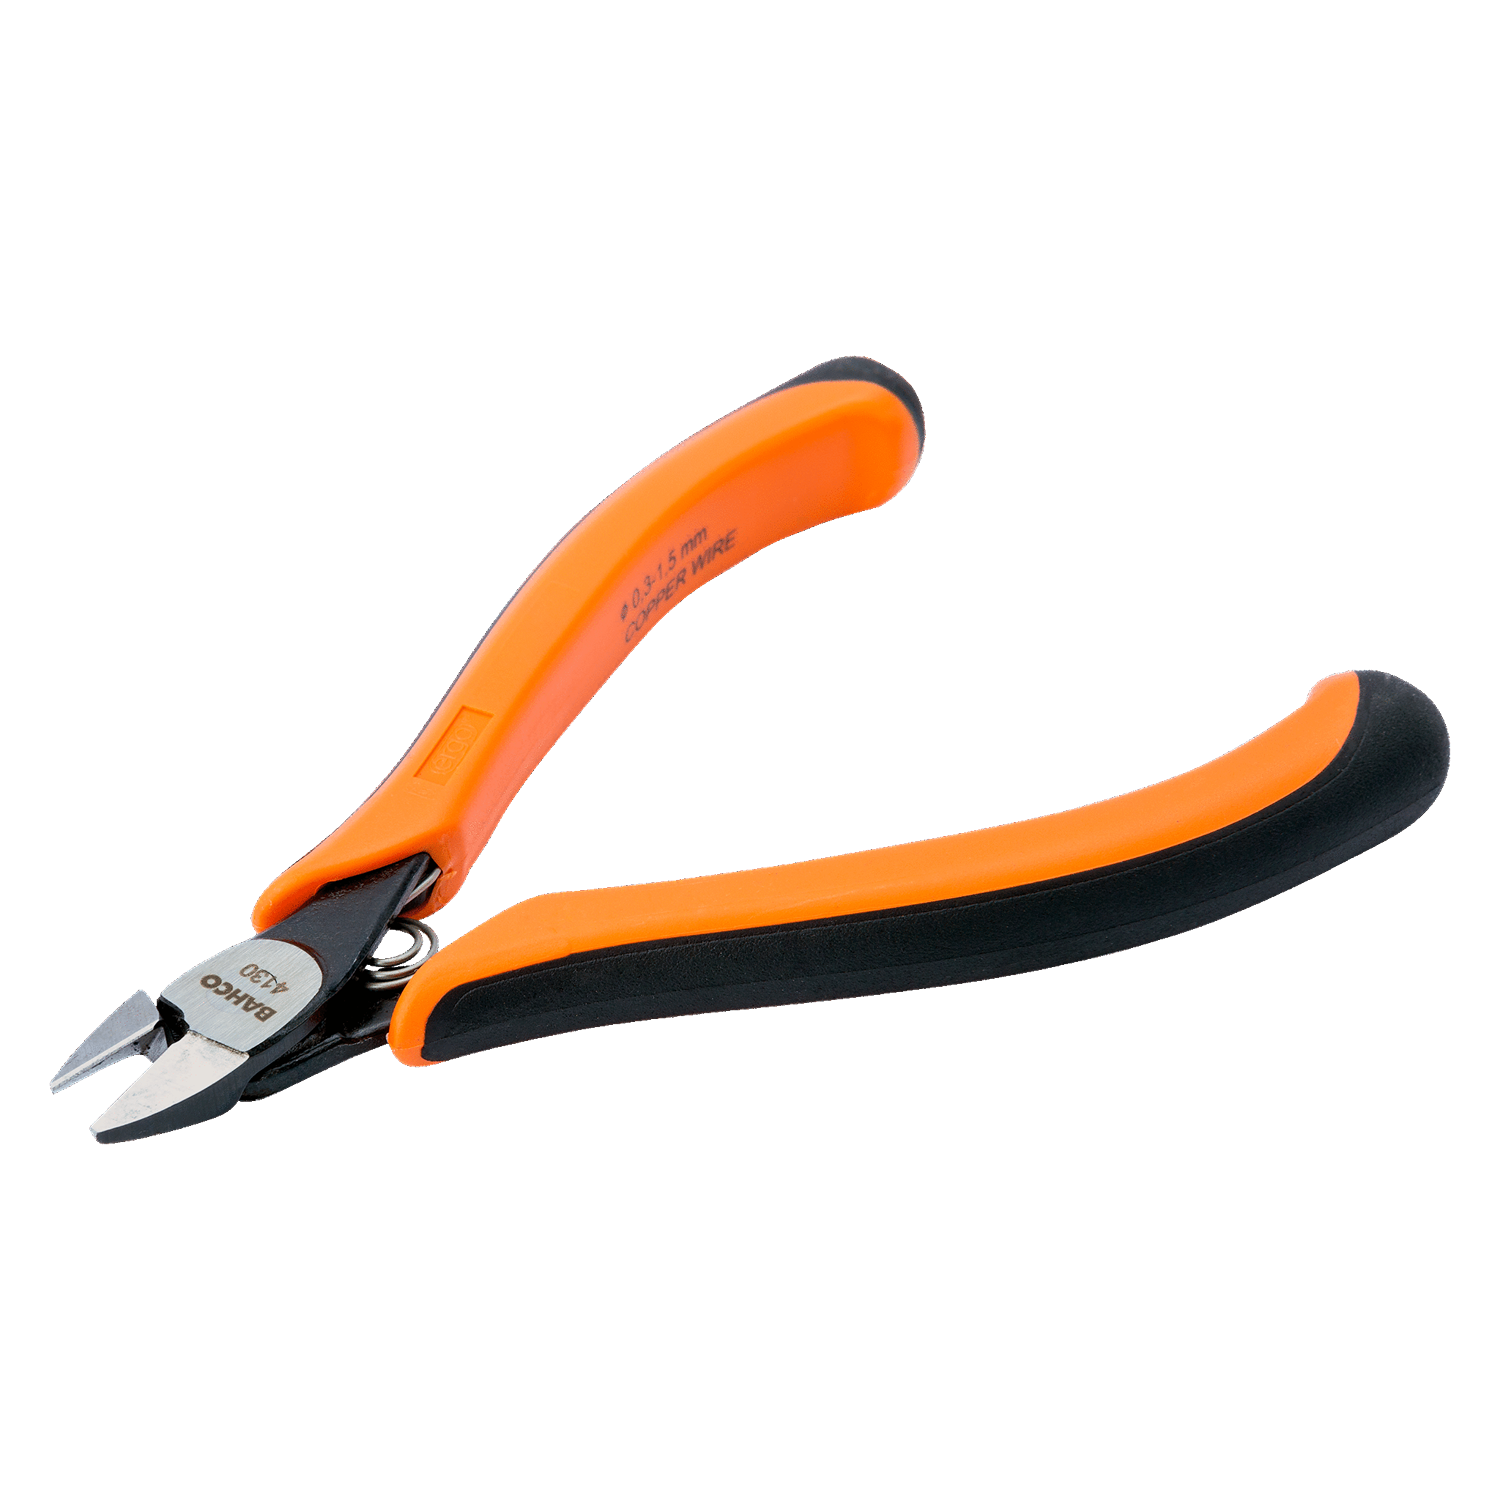 BAHCO 4130, 4131 ERGO Compact Side Cutting Plier - Premium Cutting Plier from BAHCO - Shop now at Yew Aik.